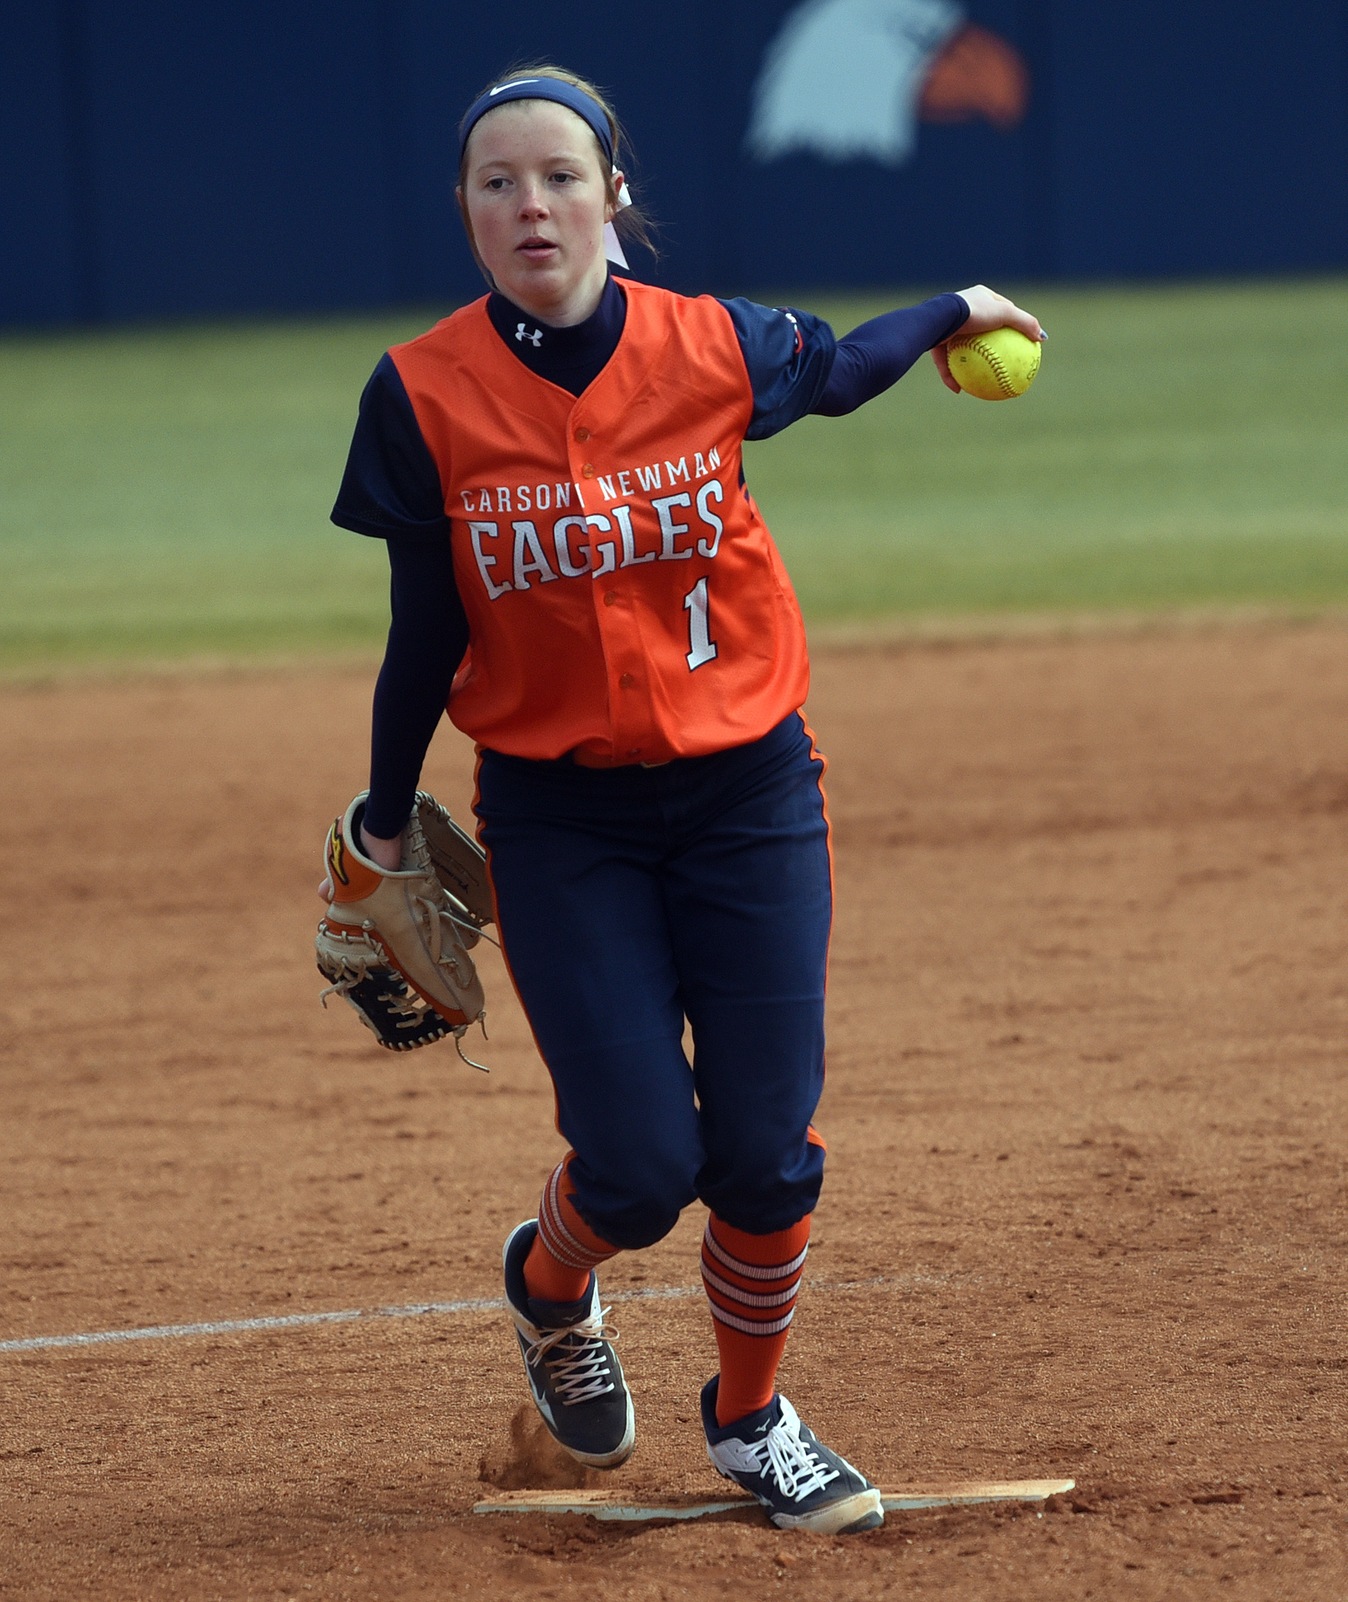 Timely hits evade Eagles in split at North Greenville